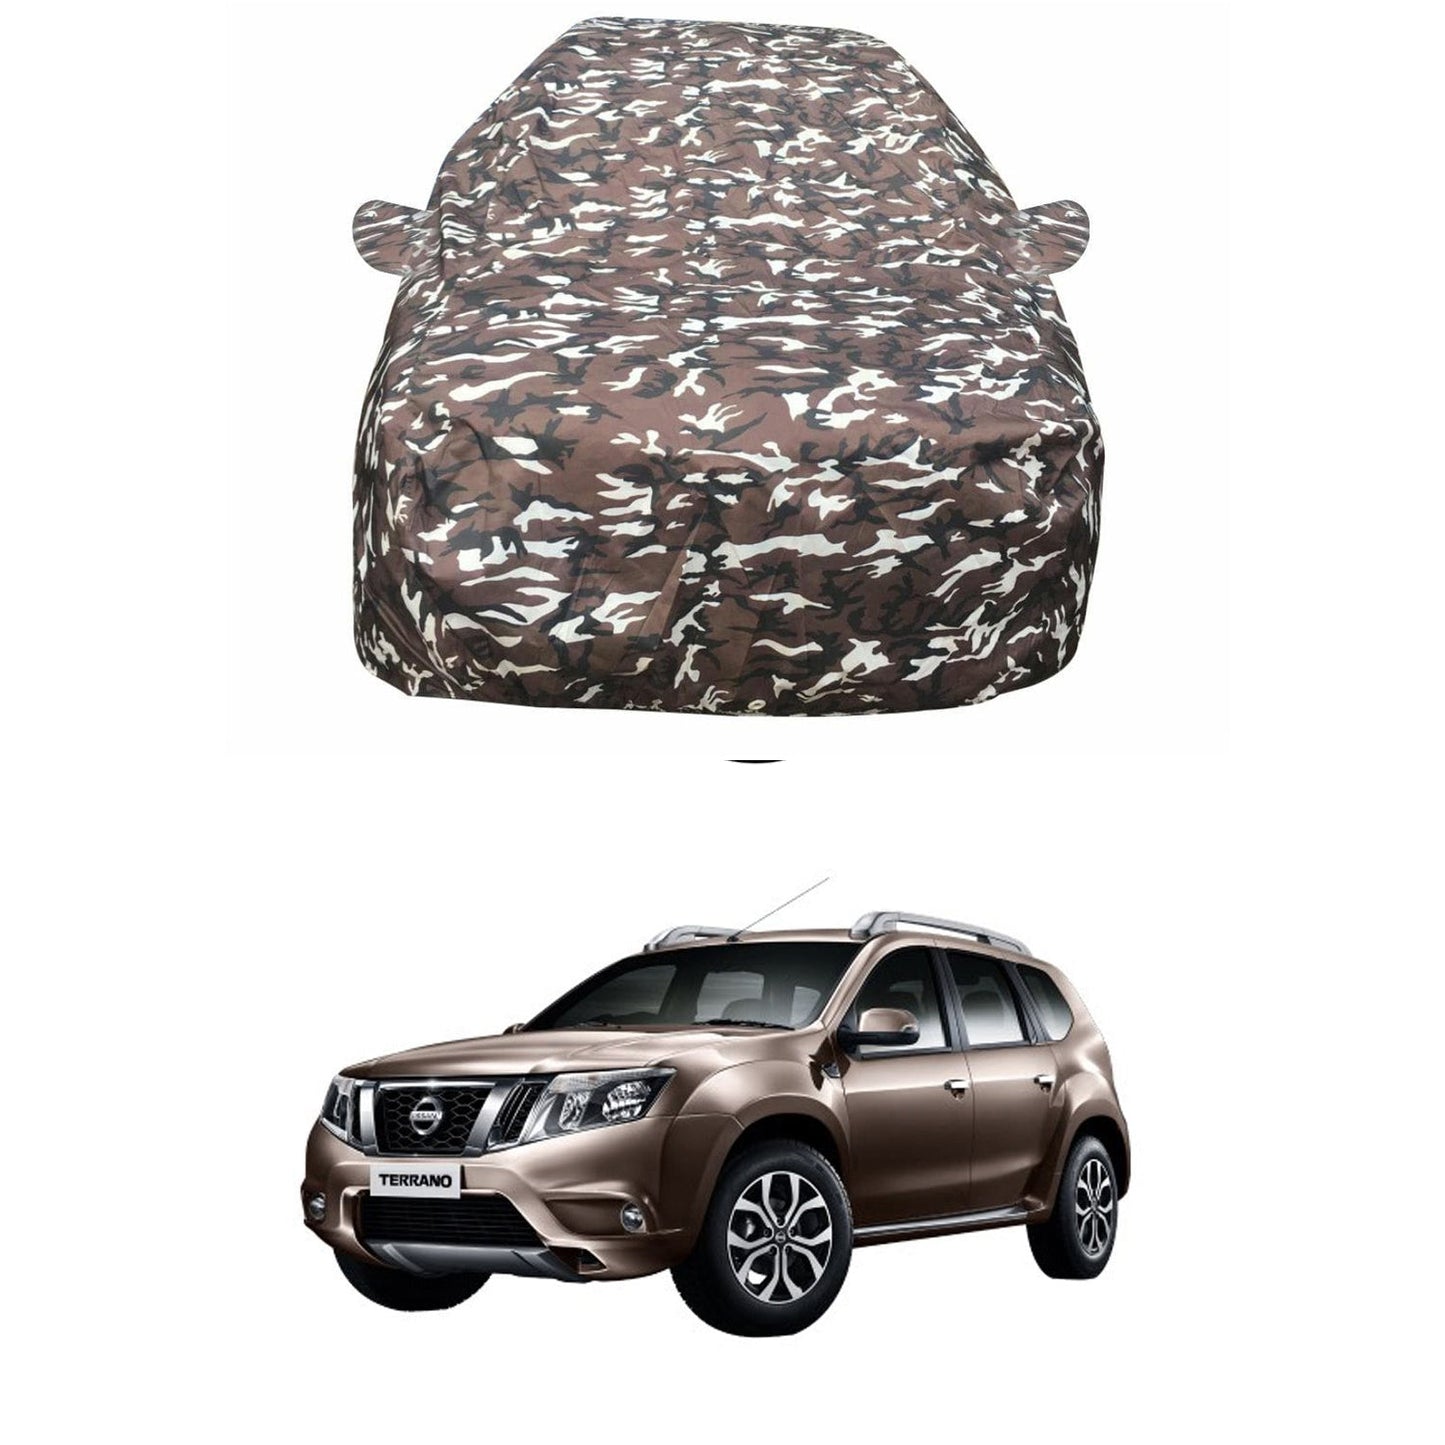 Oshotto Ranger Design Made of 100% Waterproof Car Body Cover with Mirror Pockets For Nissan Terrano